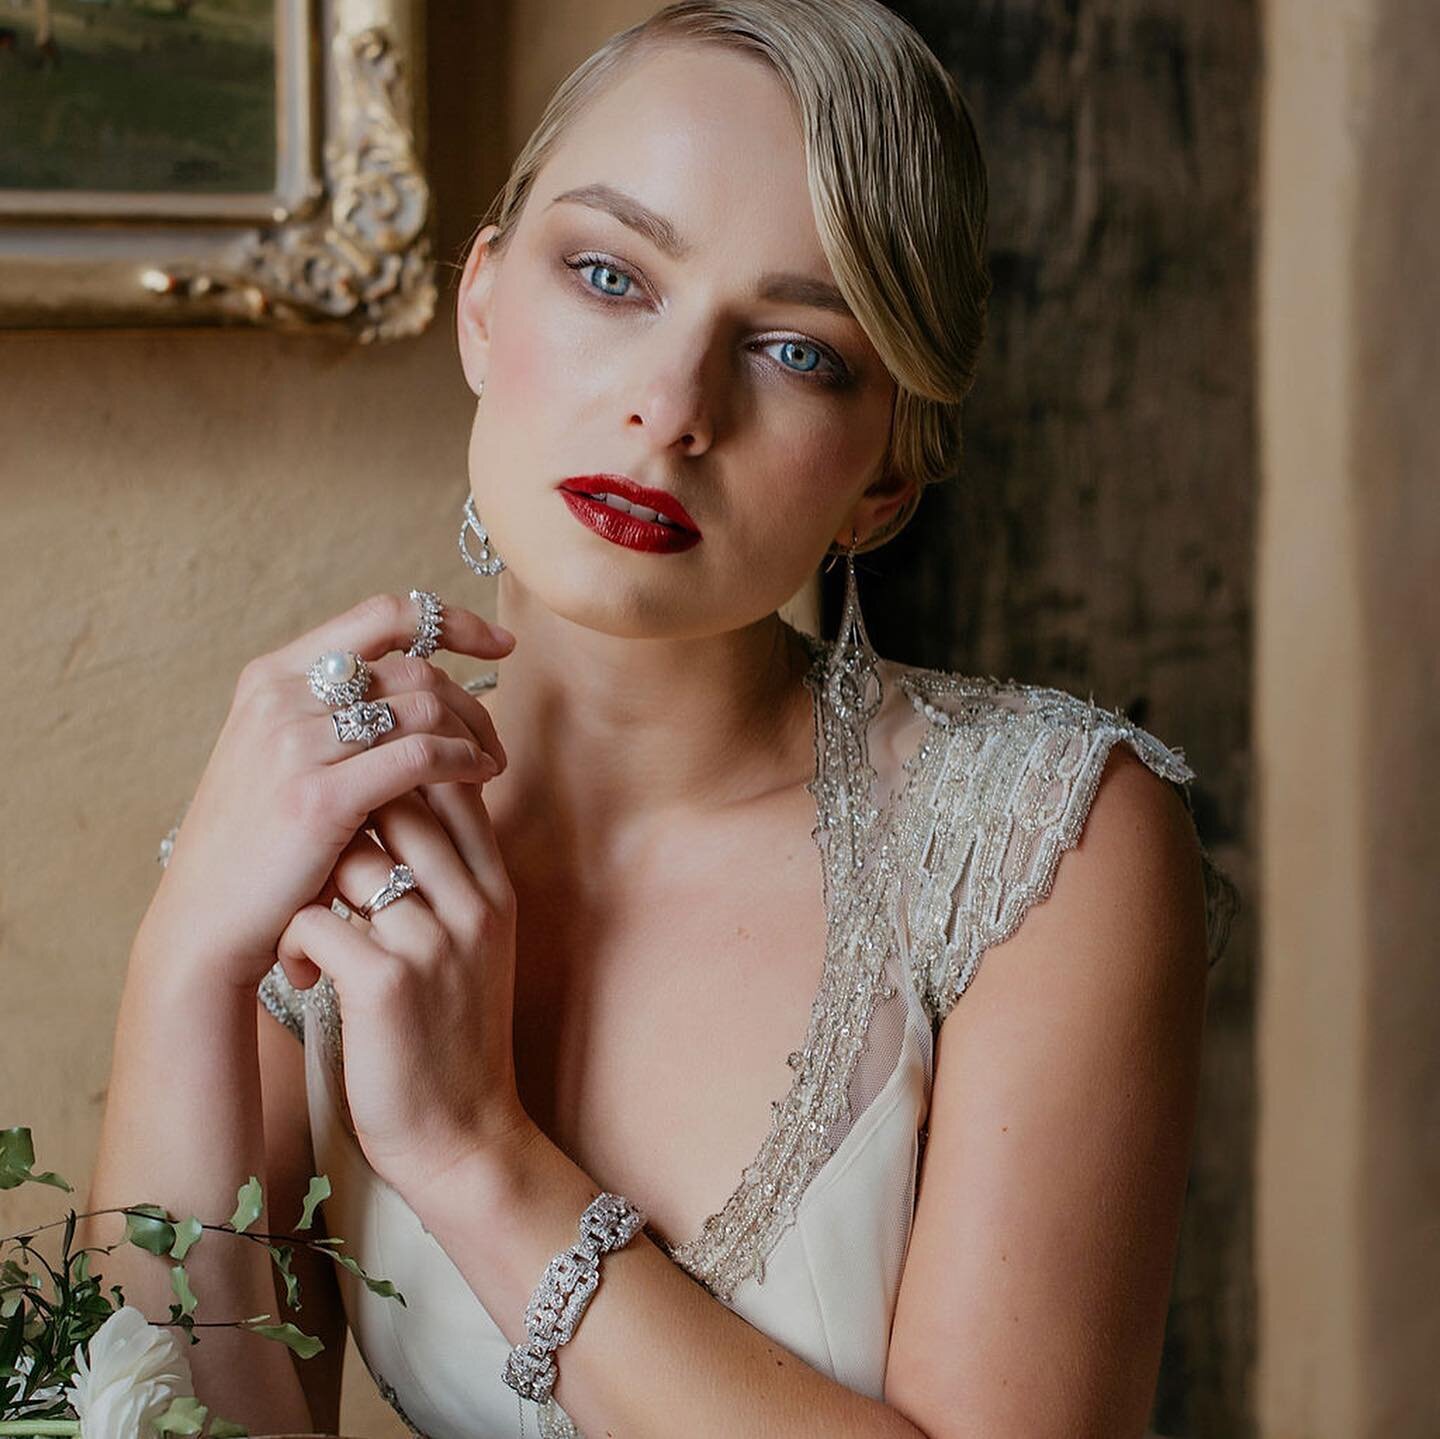 Working with @keshettjewellery was fabulous - even Vogue Bride was in agreement (they contacted Keshett for possible inclusion of this shoot in their publication). $70,000 - the value of the jewels on this shoot😍
⠀⠀⠀⠀⠀⠀⠀⠀⠀⠀⠀⠀
One of the unsung benef